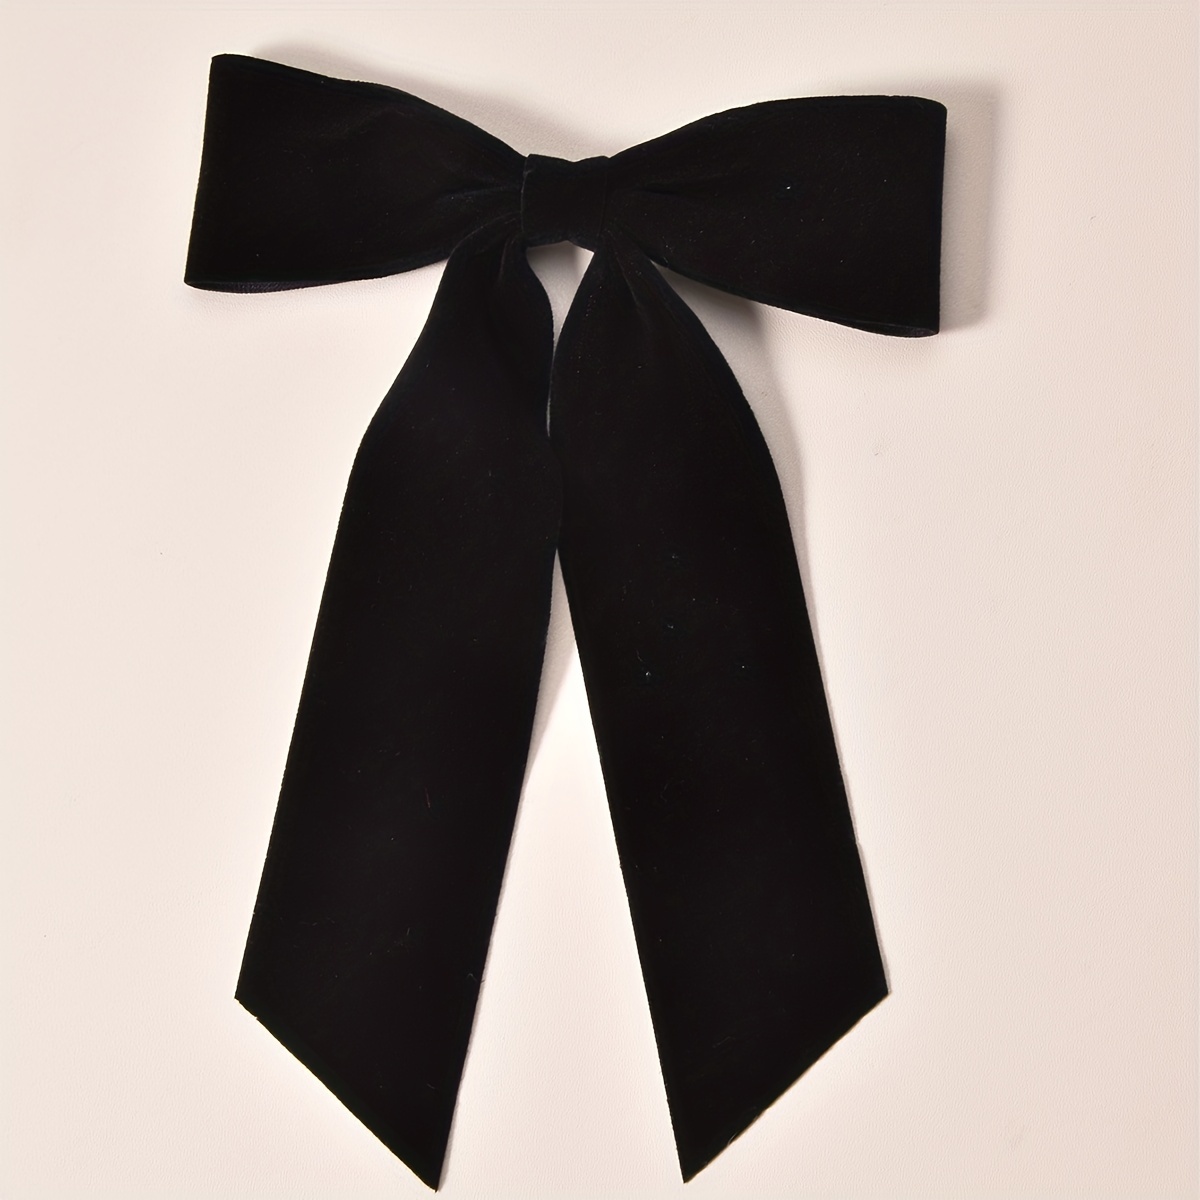 Black Bow Knot Hair Clip Female Black Vintage Duck Billed Clip With Long  Ribbon Coquette Style Headwear Female